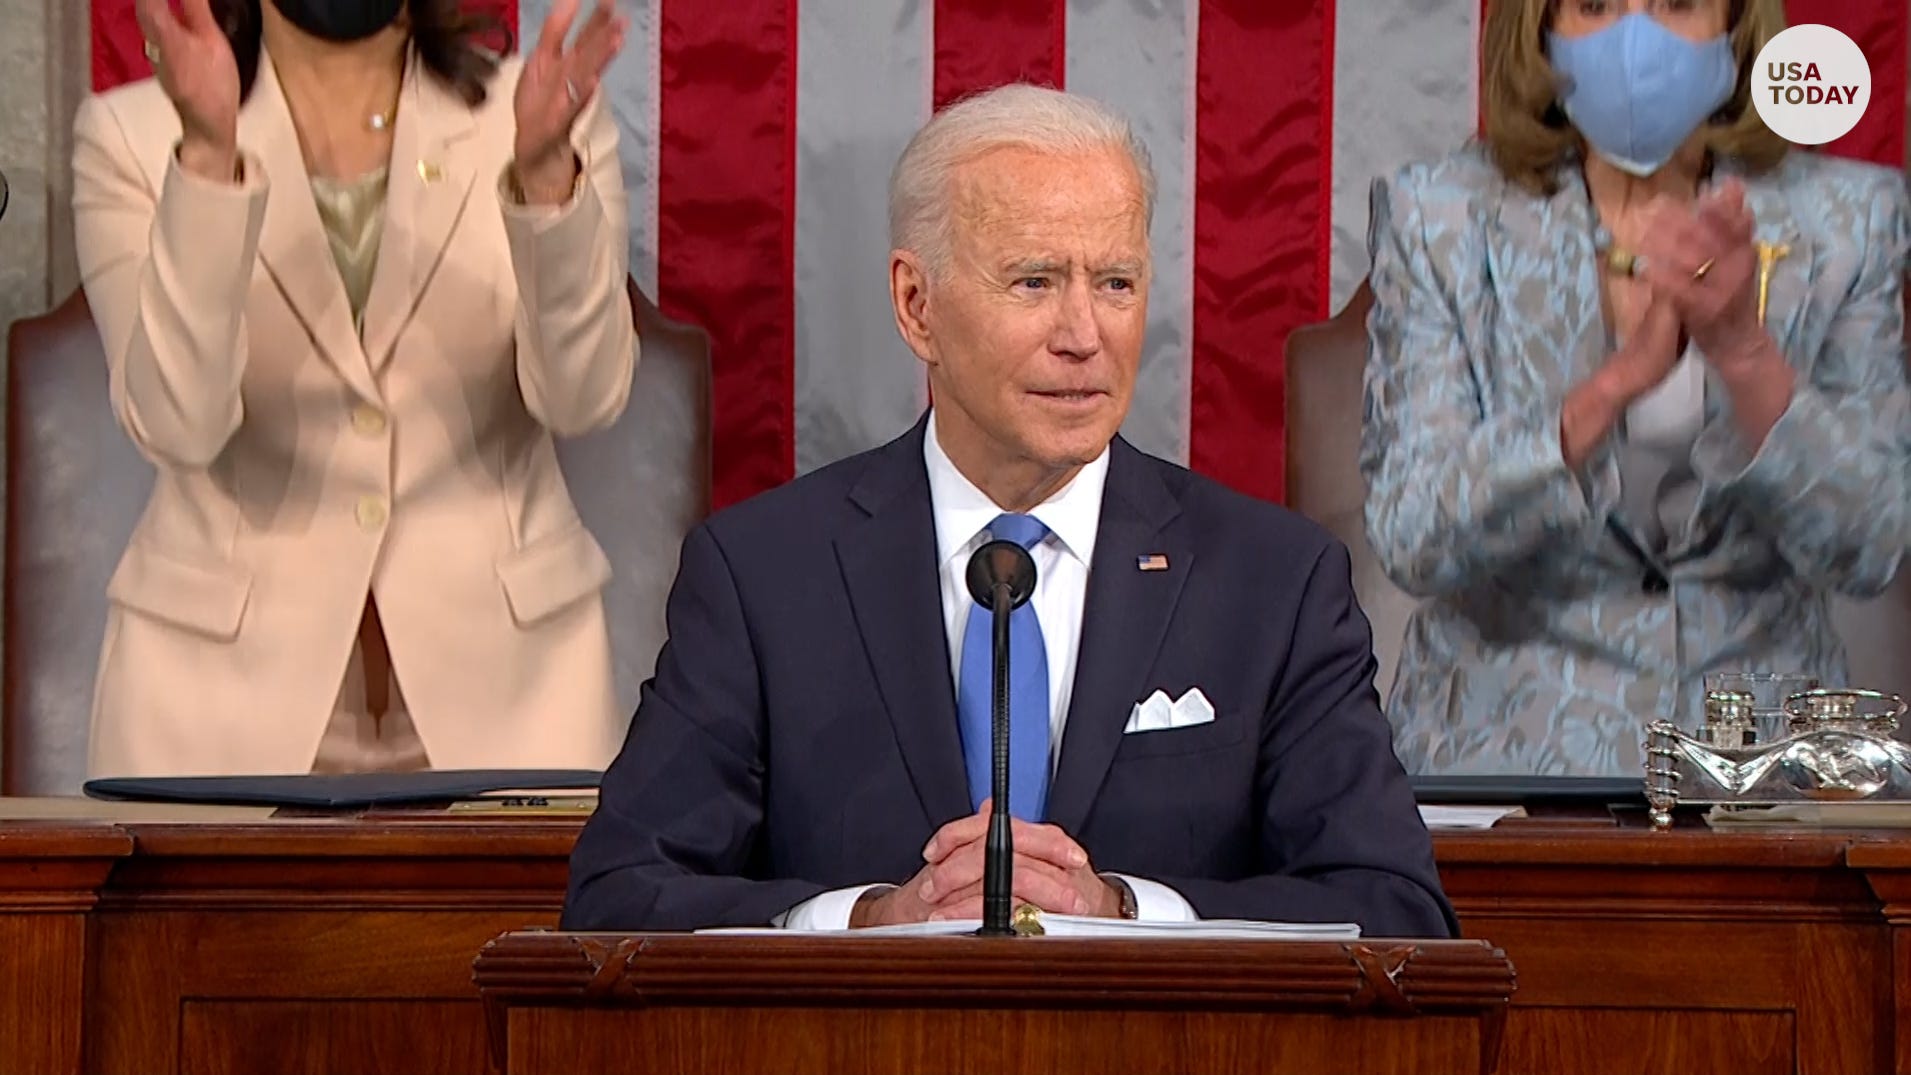 President Biden Pushes For Passage Of Equality Act During Speech To Congress